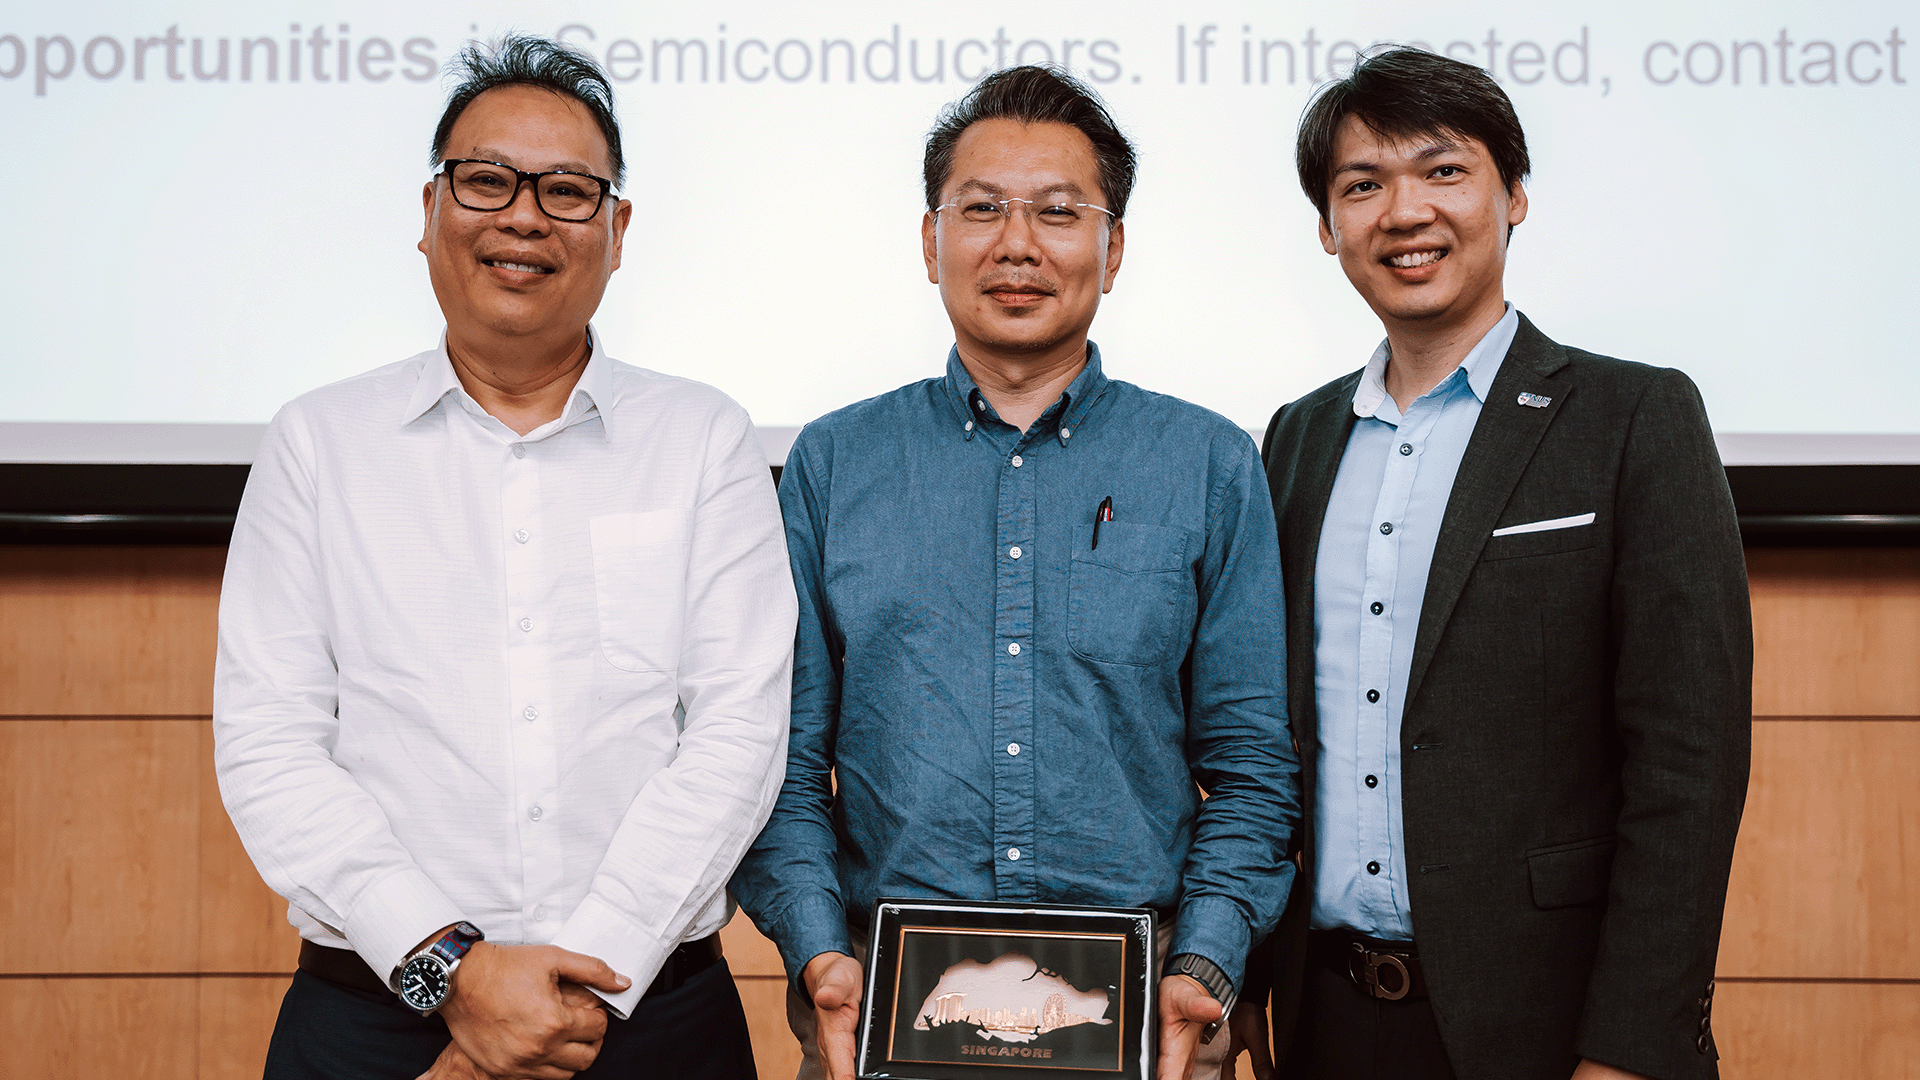 Prof Yeo with (left) Prof Teo Kie Leong, Dean of CDE, and (right) Assoc Prof Benjamin Tee, Vice Dean Research and Technology CDE.